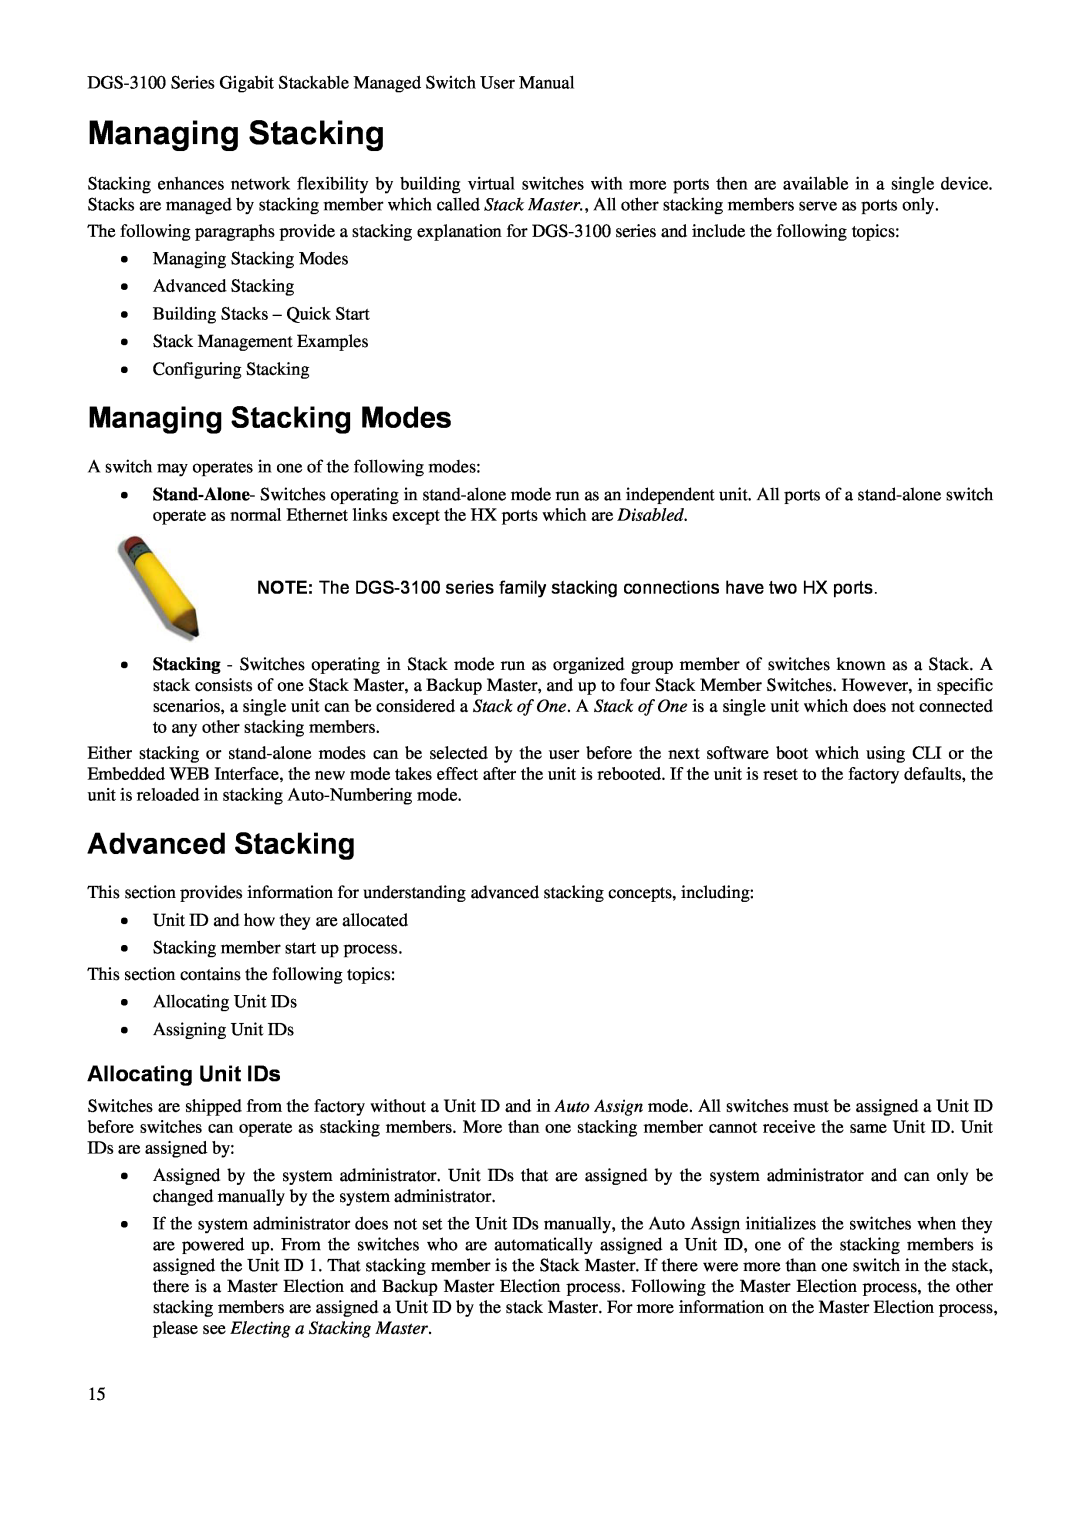 D-Link DGS-3100 user manual Managing Stacking Modes, Advanced Stacking, Allocating Unit IDs 